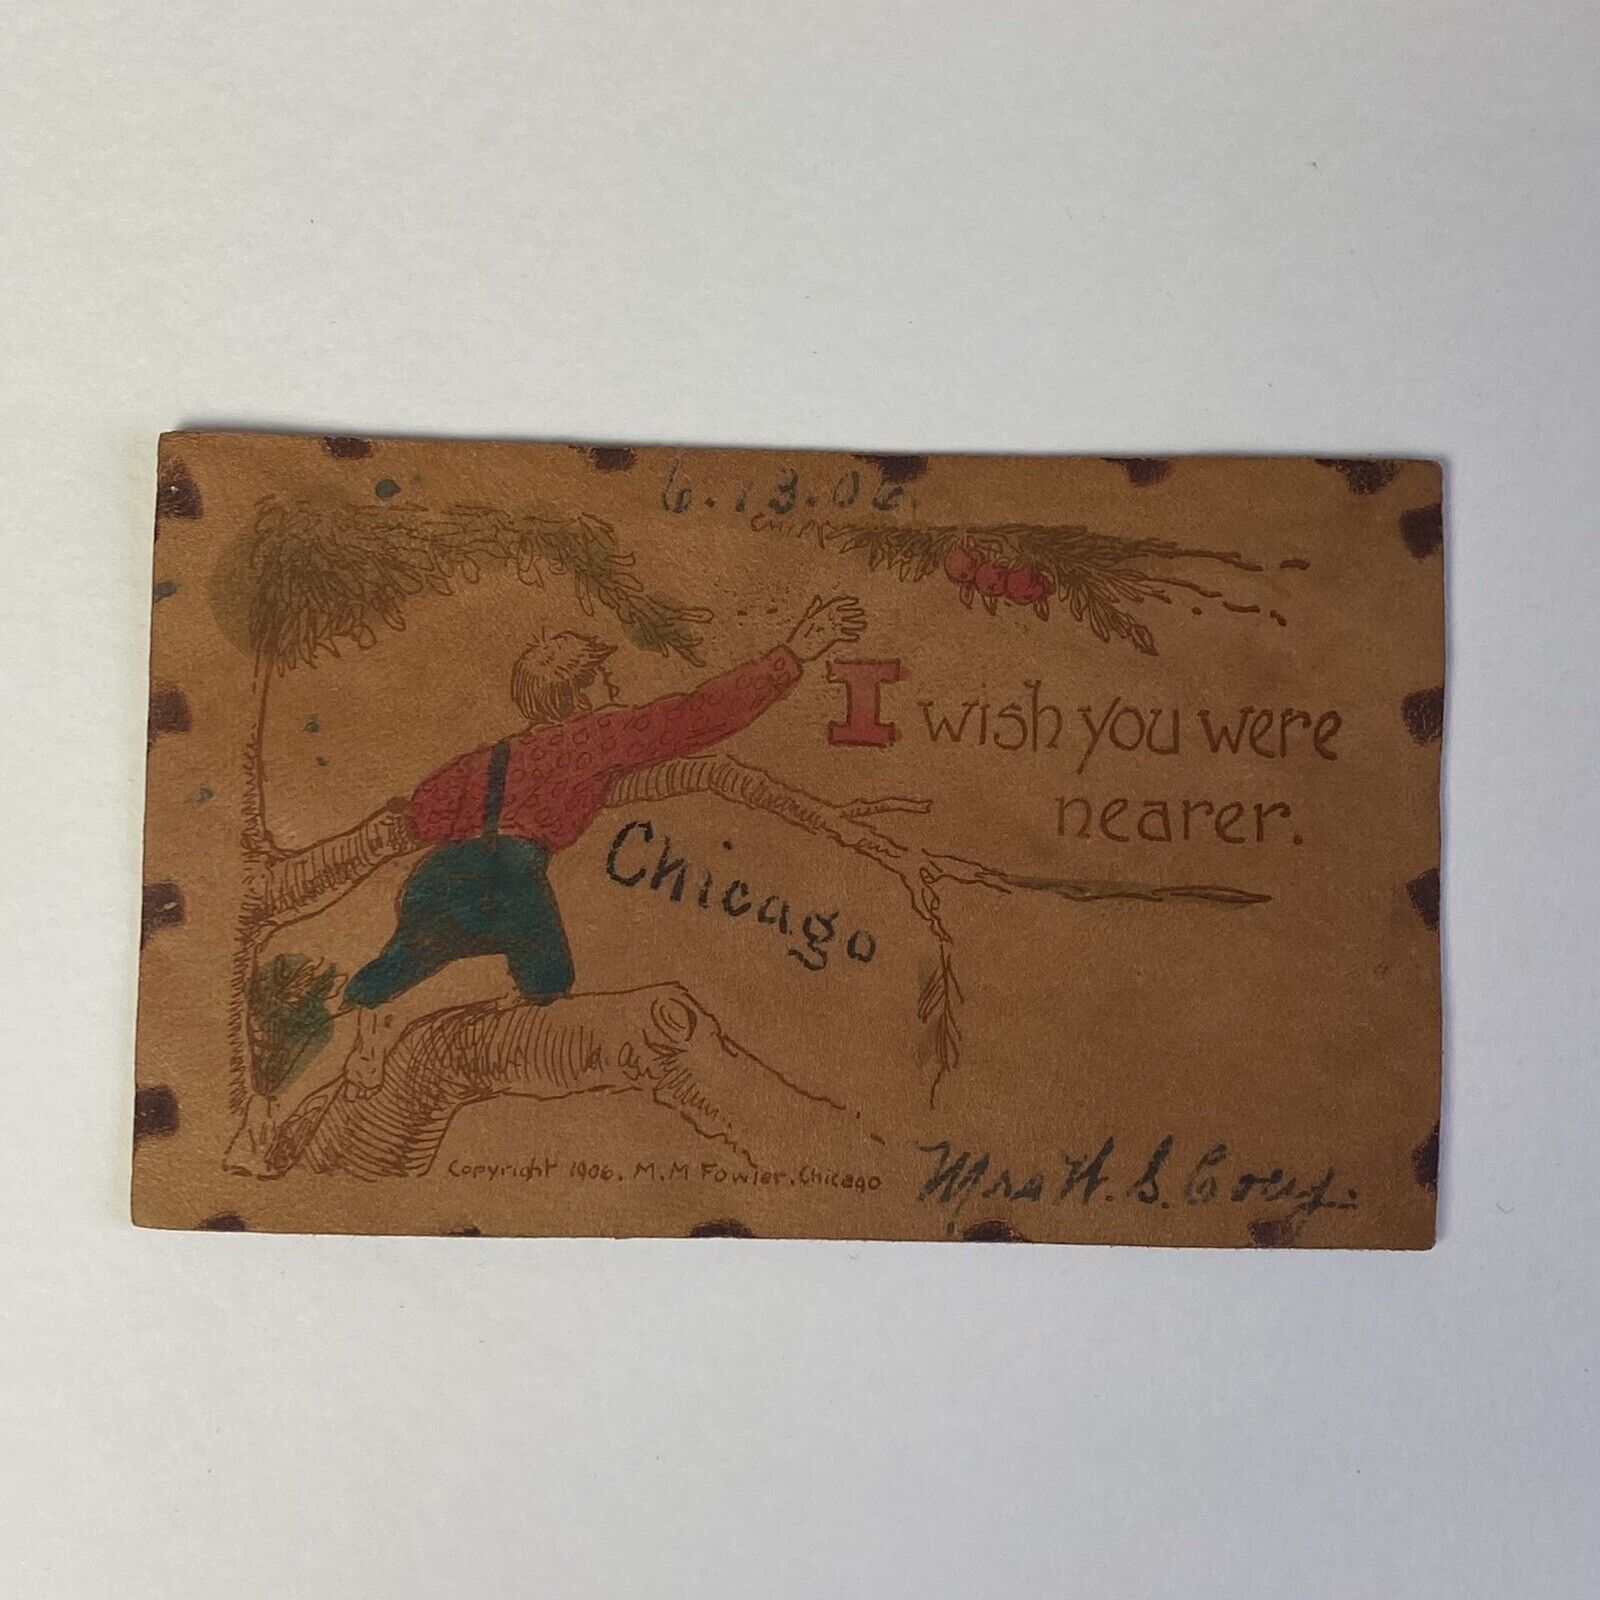 Antique Leather Postcard “I wish you were nearer” c. 1906 M.M. Fowler, Chicago